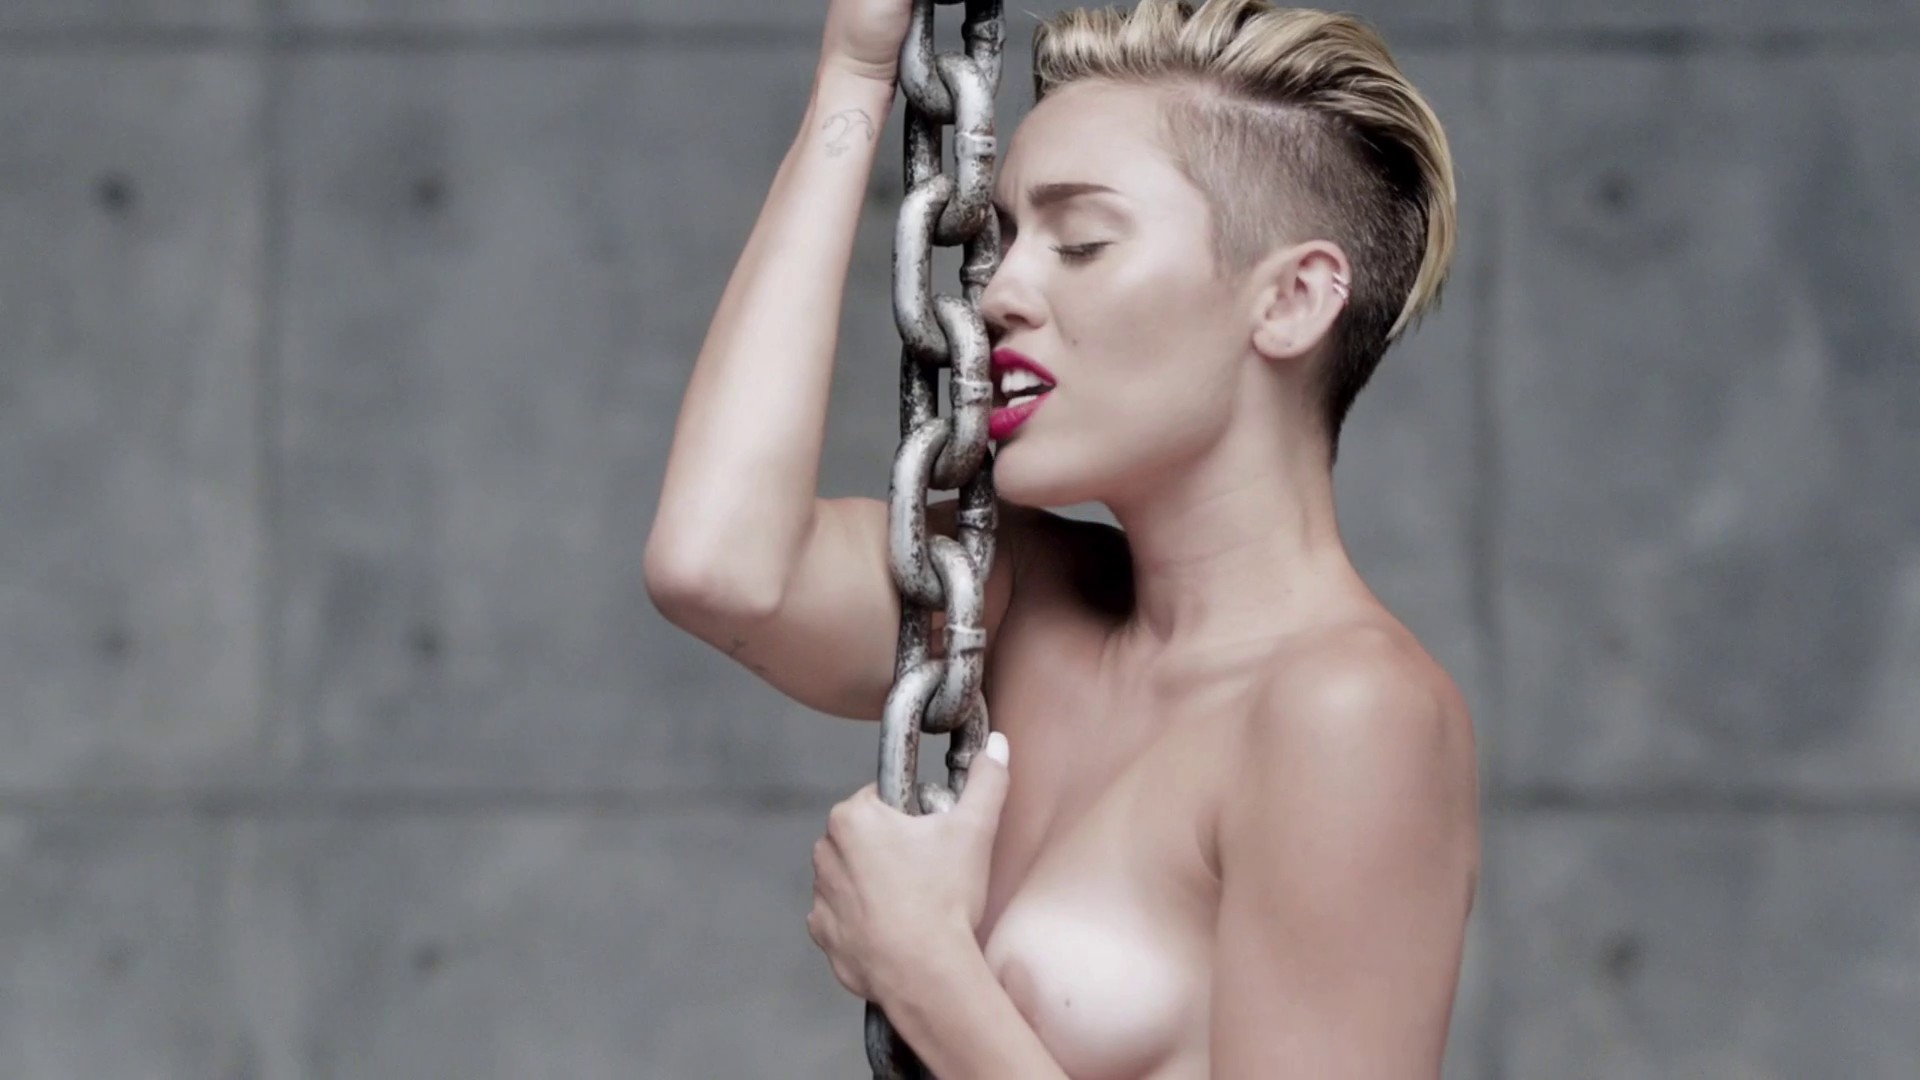 Miley Cyrus - Wrecking Ball explicit uncensored video 1080p2792.jpg